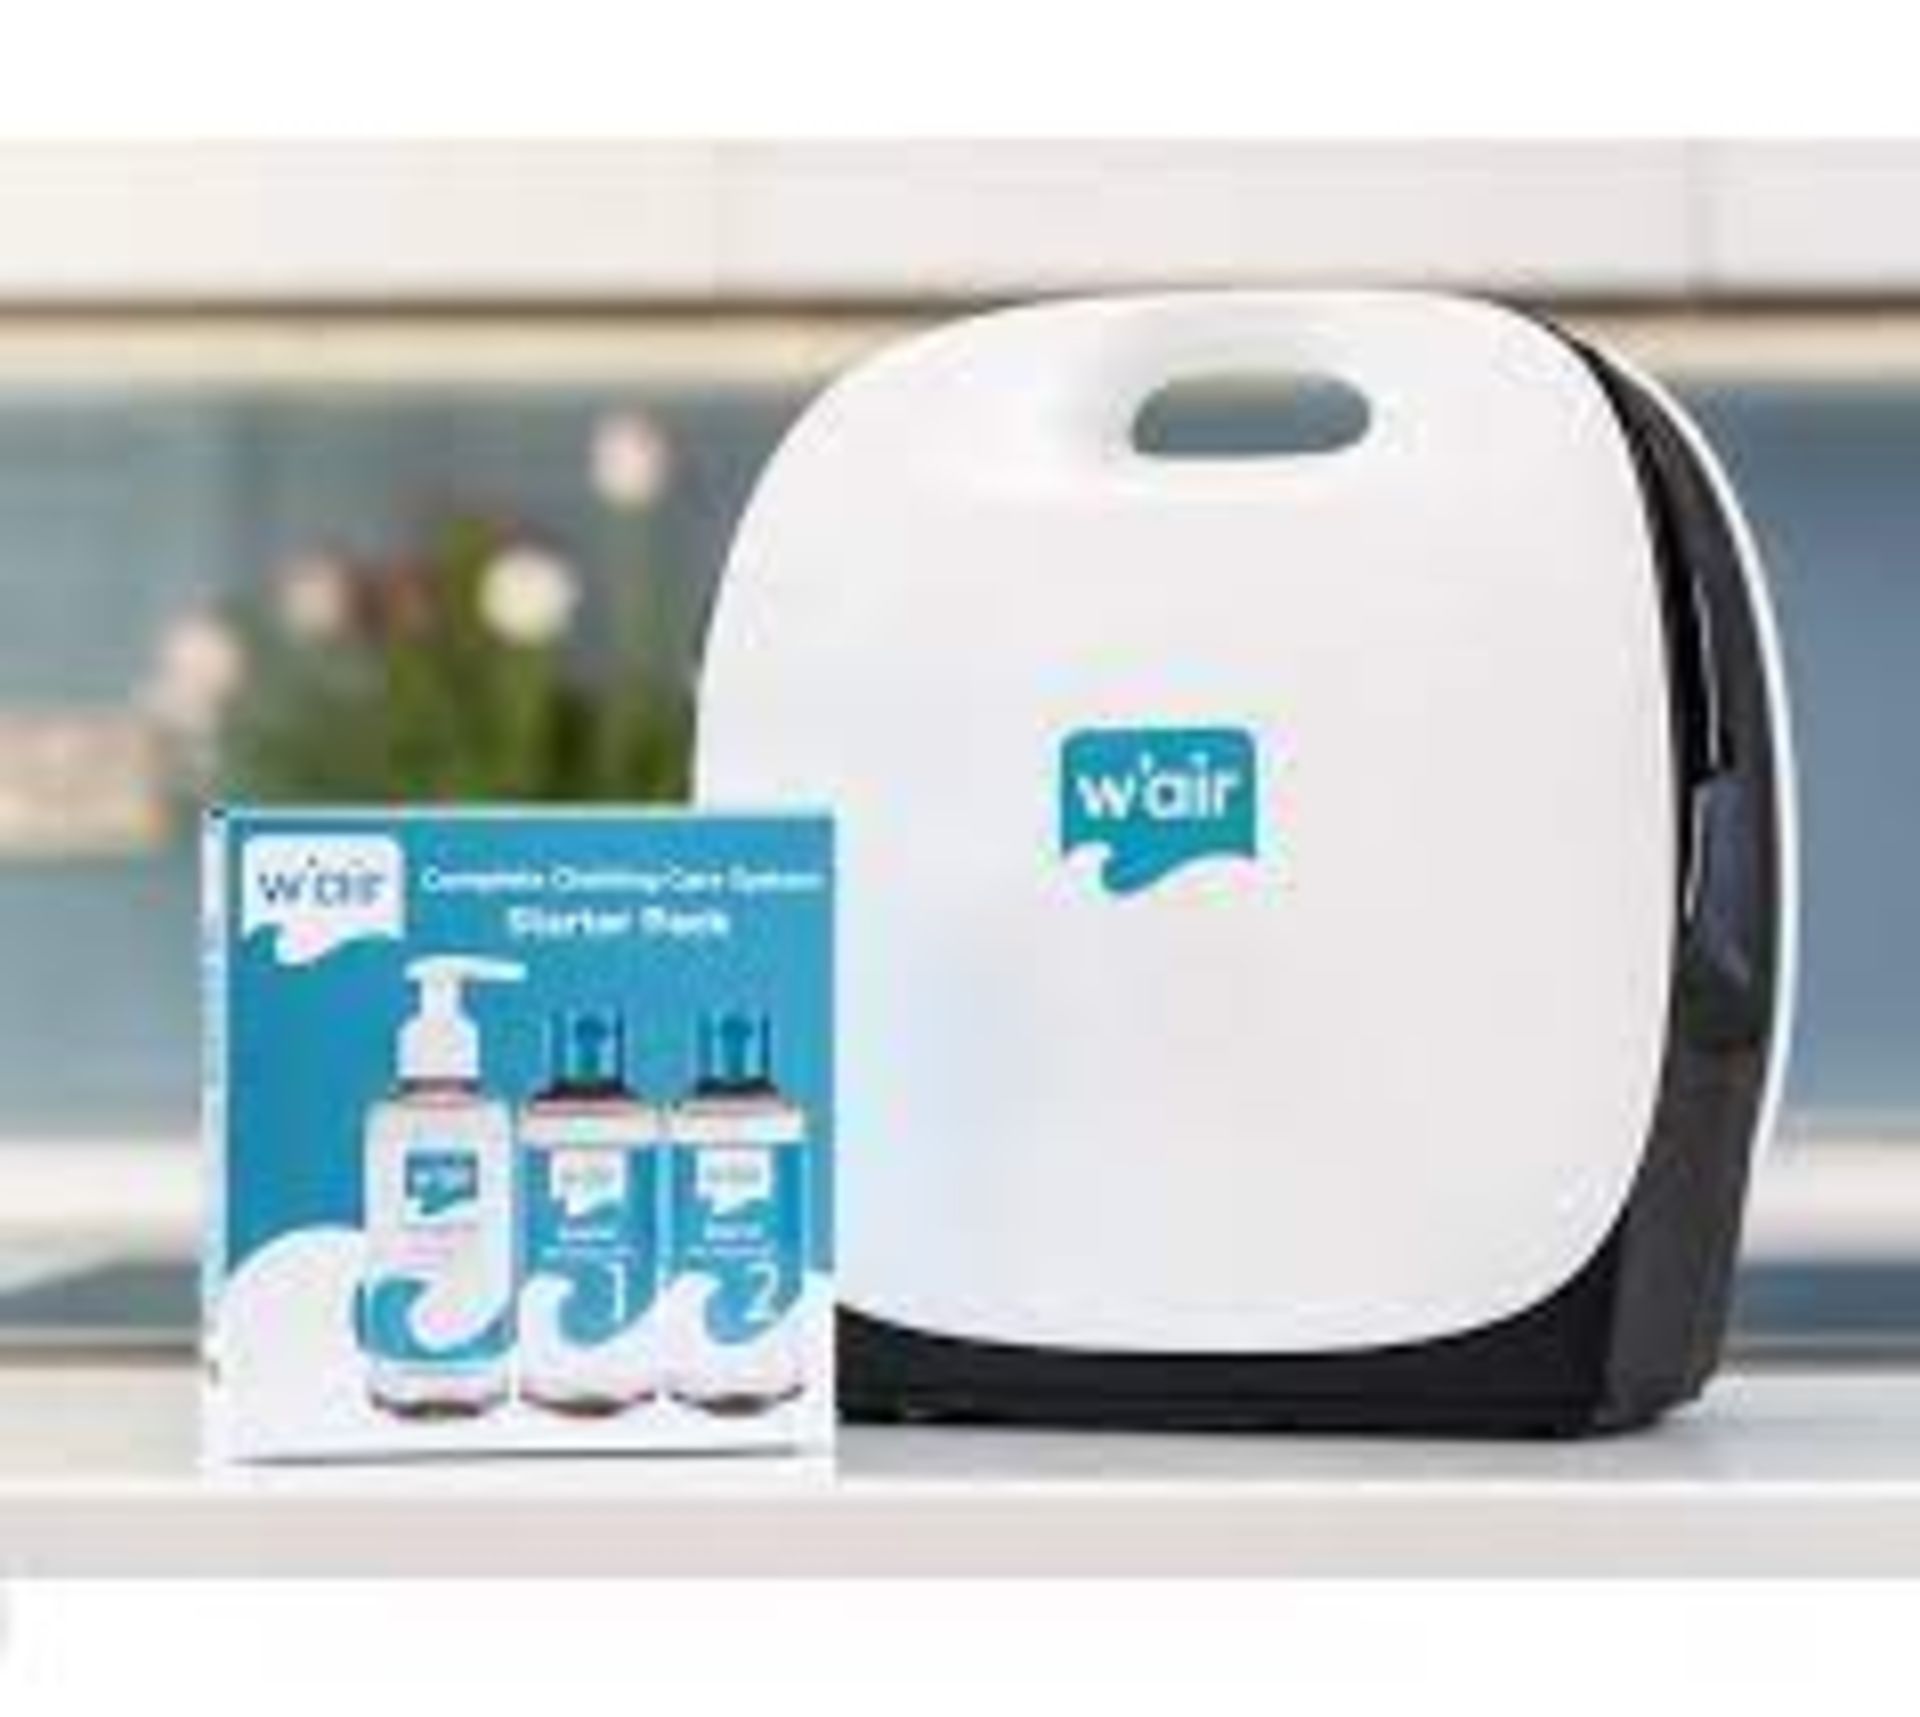 BRAND NEW W'AIR SNEAKER CLEANING SYSTEMS RRP £299 The w'air uses hydrodynamic technology producing a - Image 6 of 6